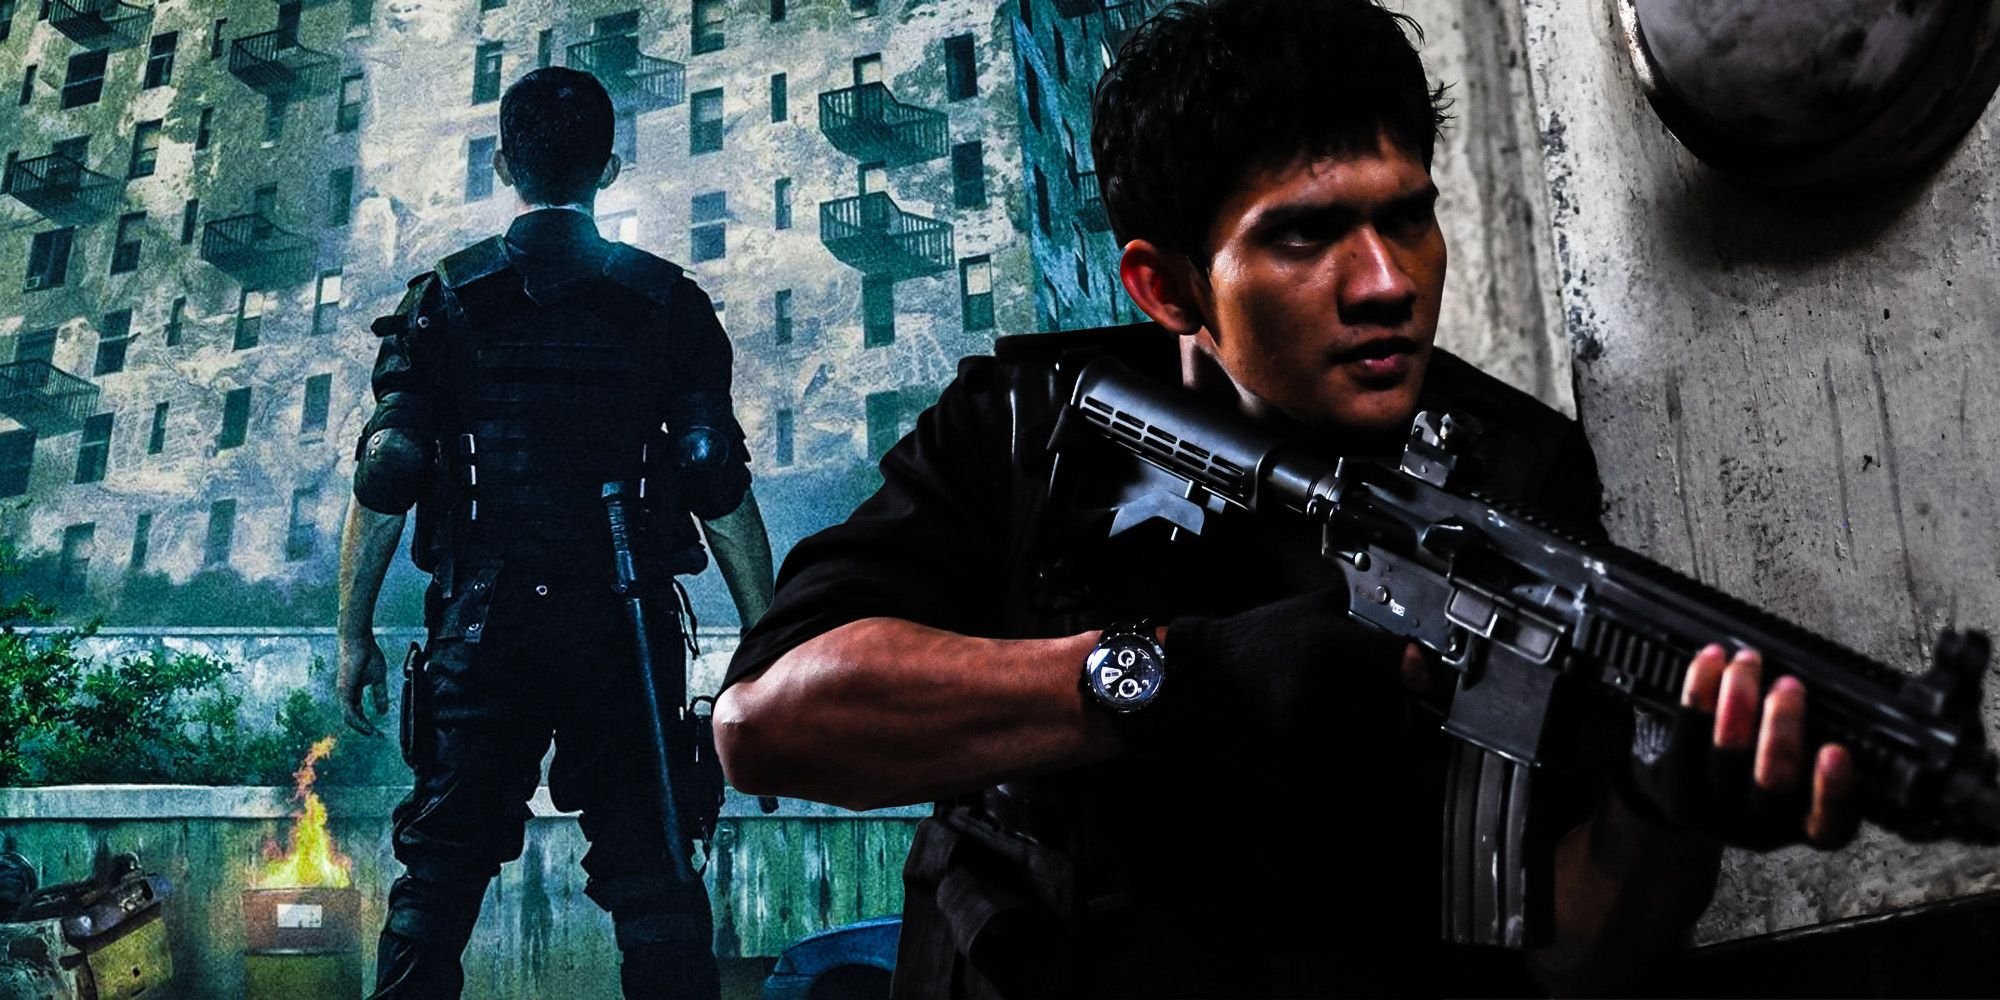 The Raid remake recipe for disaster